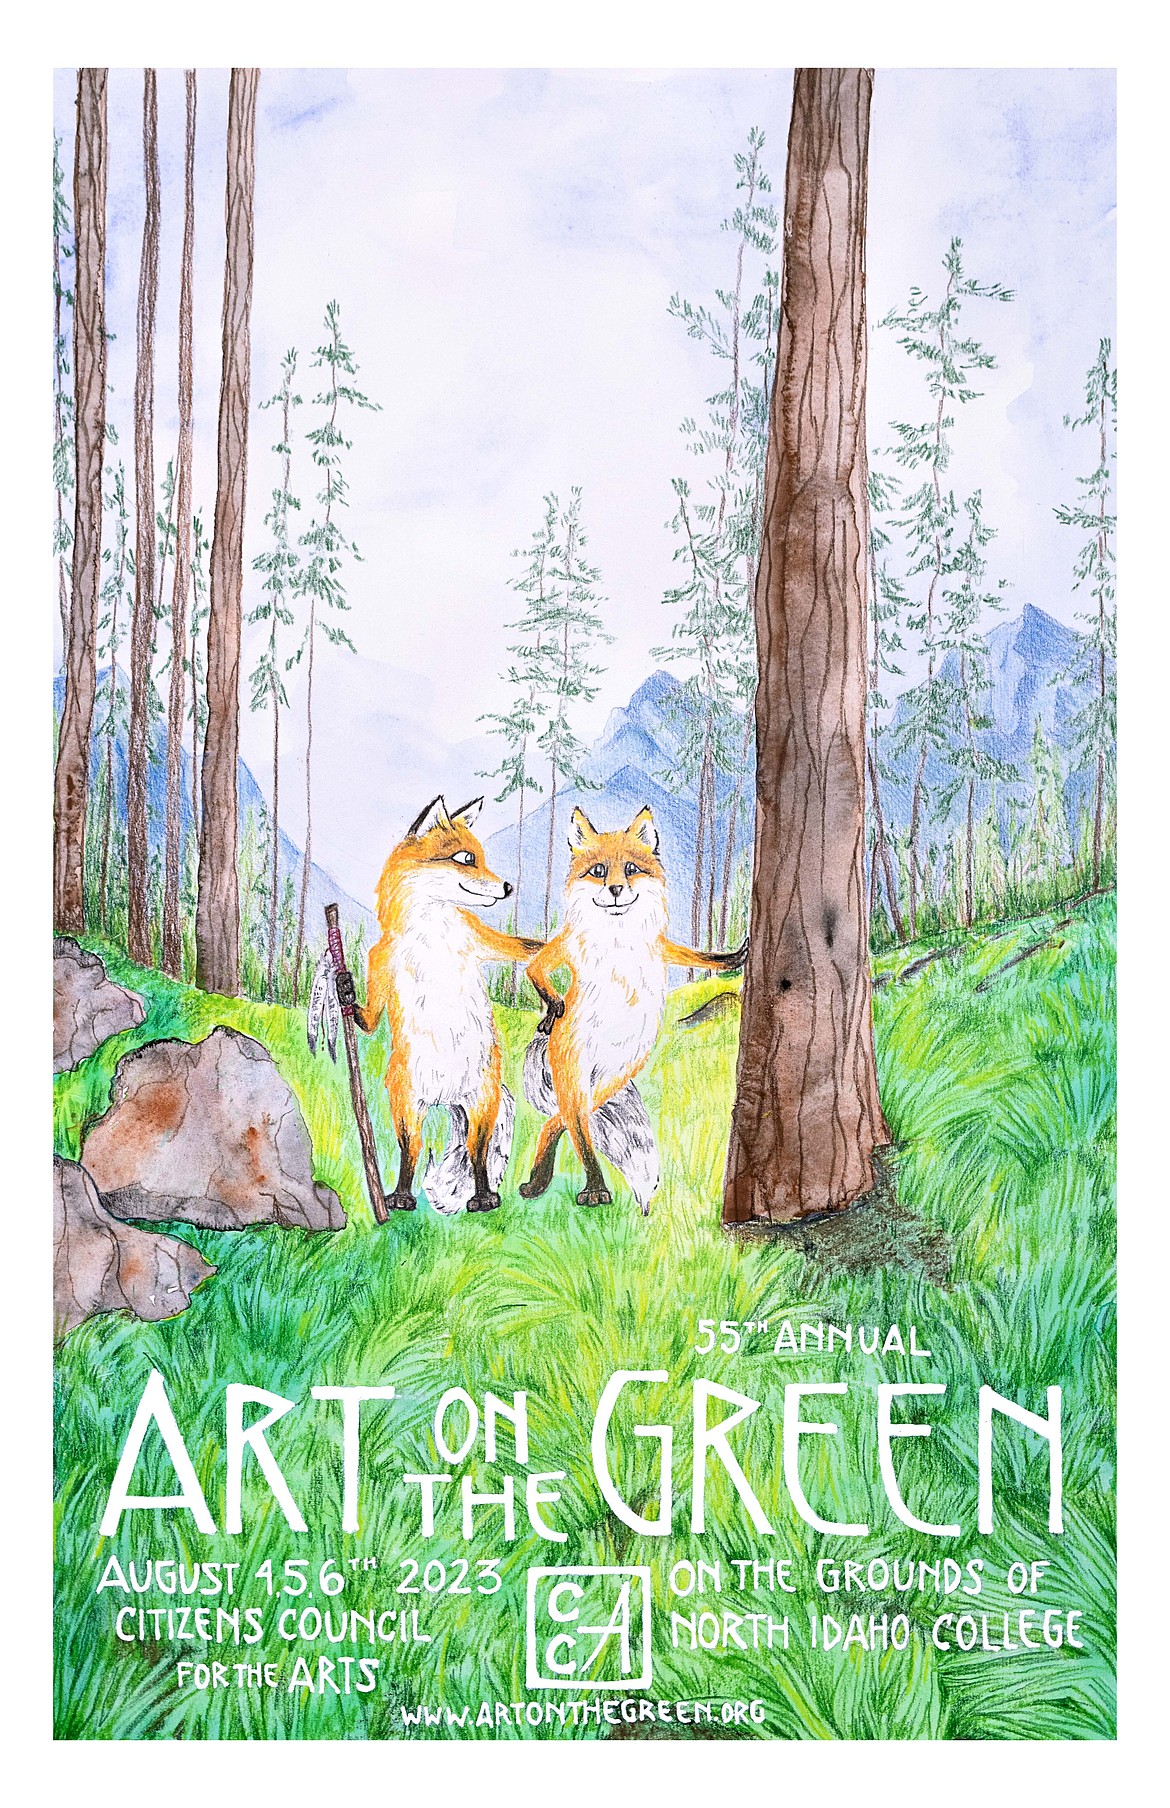 This year's Art on the Green Poster Contest winner is Brittany Groves, a respiratory therapist at Sacred Heart Medical Center in Spokane. "I wanted to paint something joyful, and I love foxes in particular," she said in a news release. "I feel honored to be chosen and excited to see the other beautiful works of art at this year's festival."